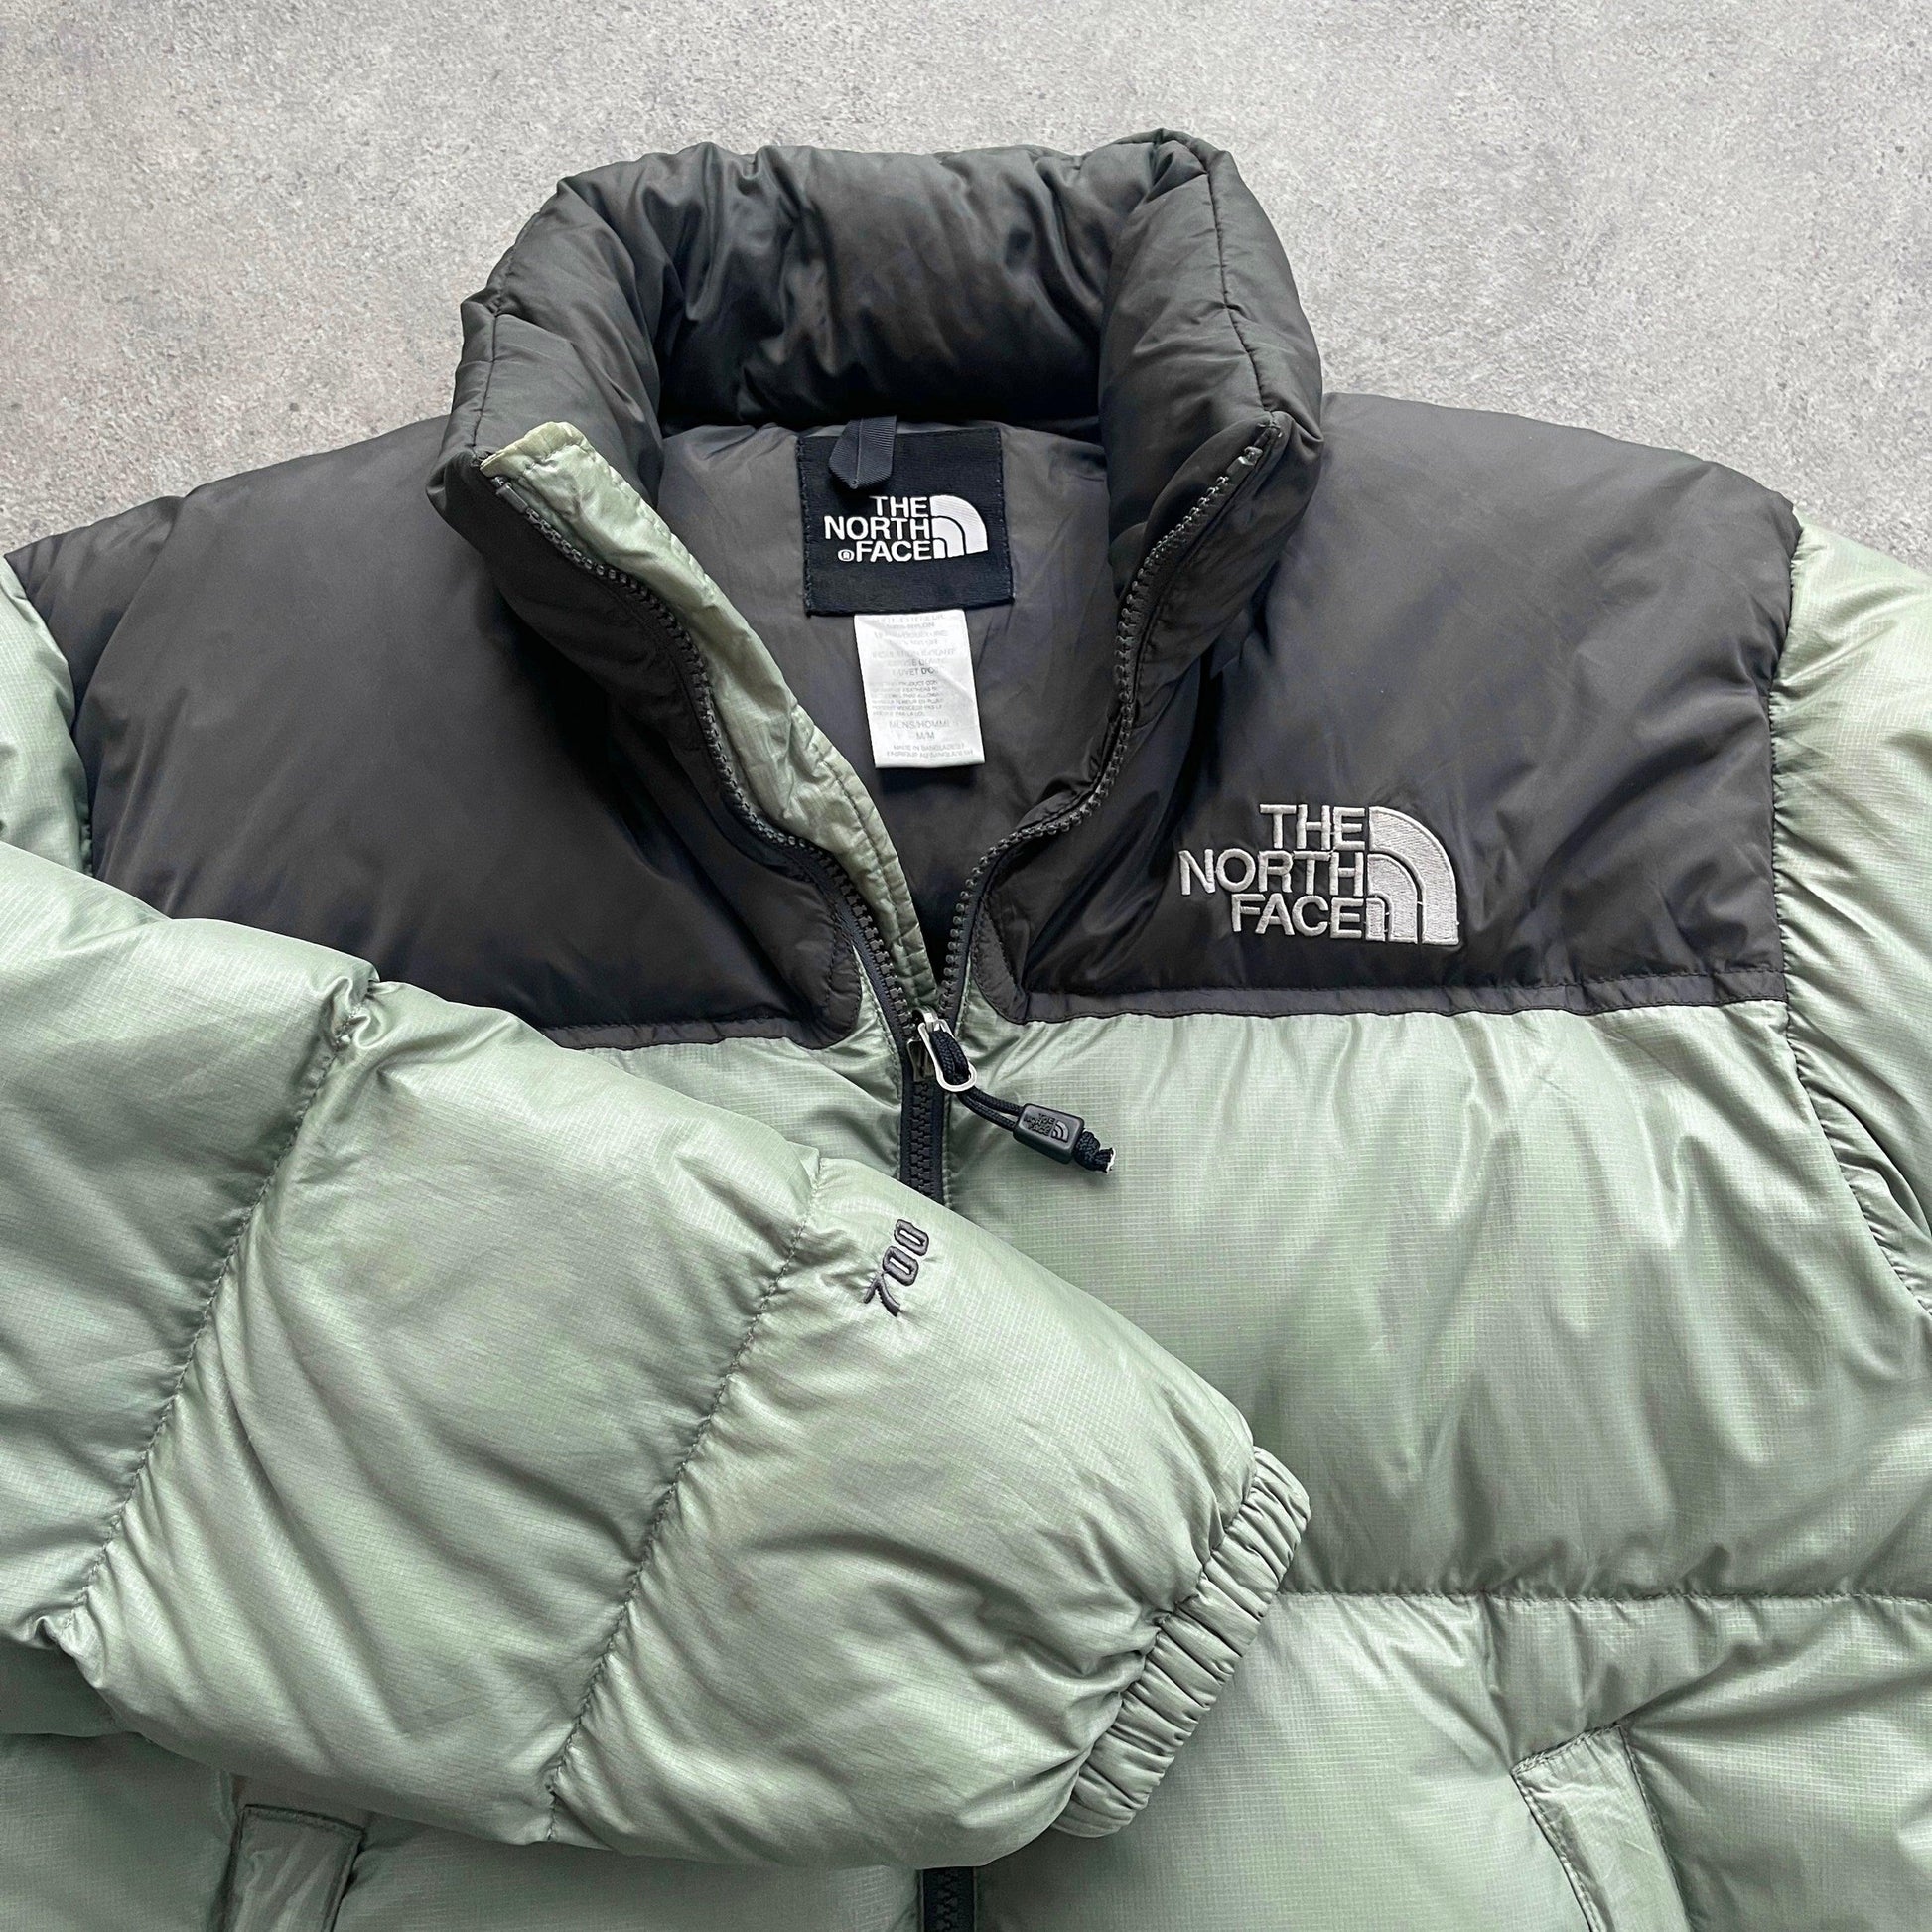 The North Face RARE Nuptse 700 down fill puffer jacket (M) - Known Source